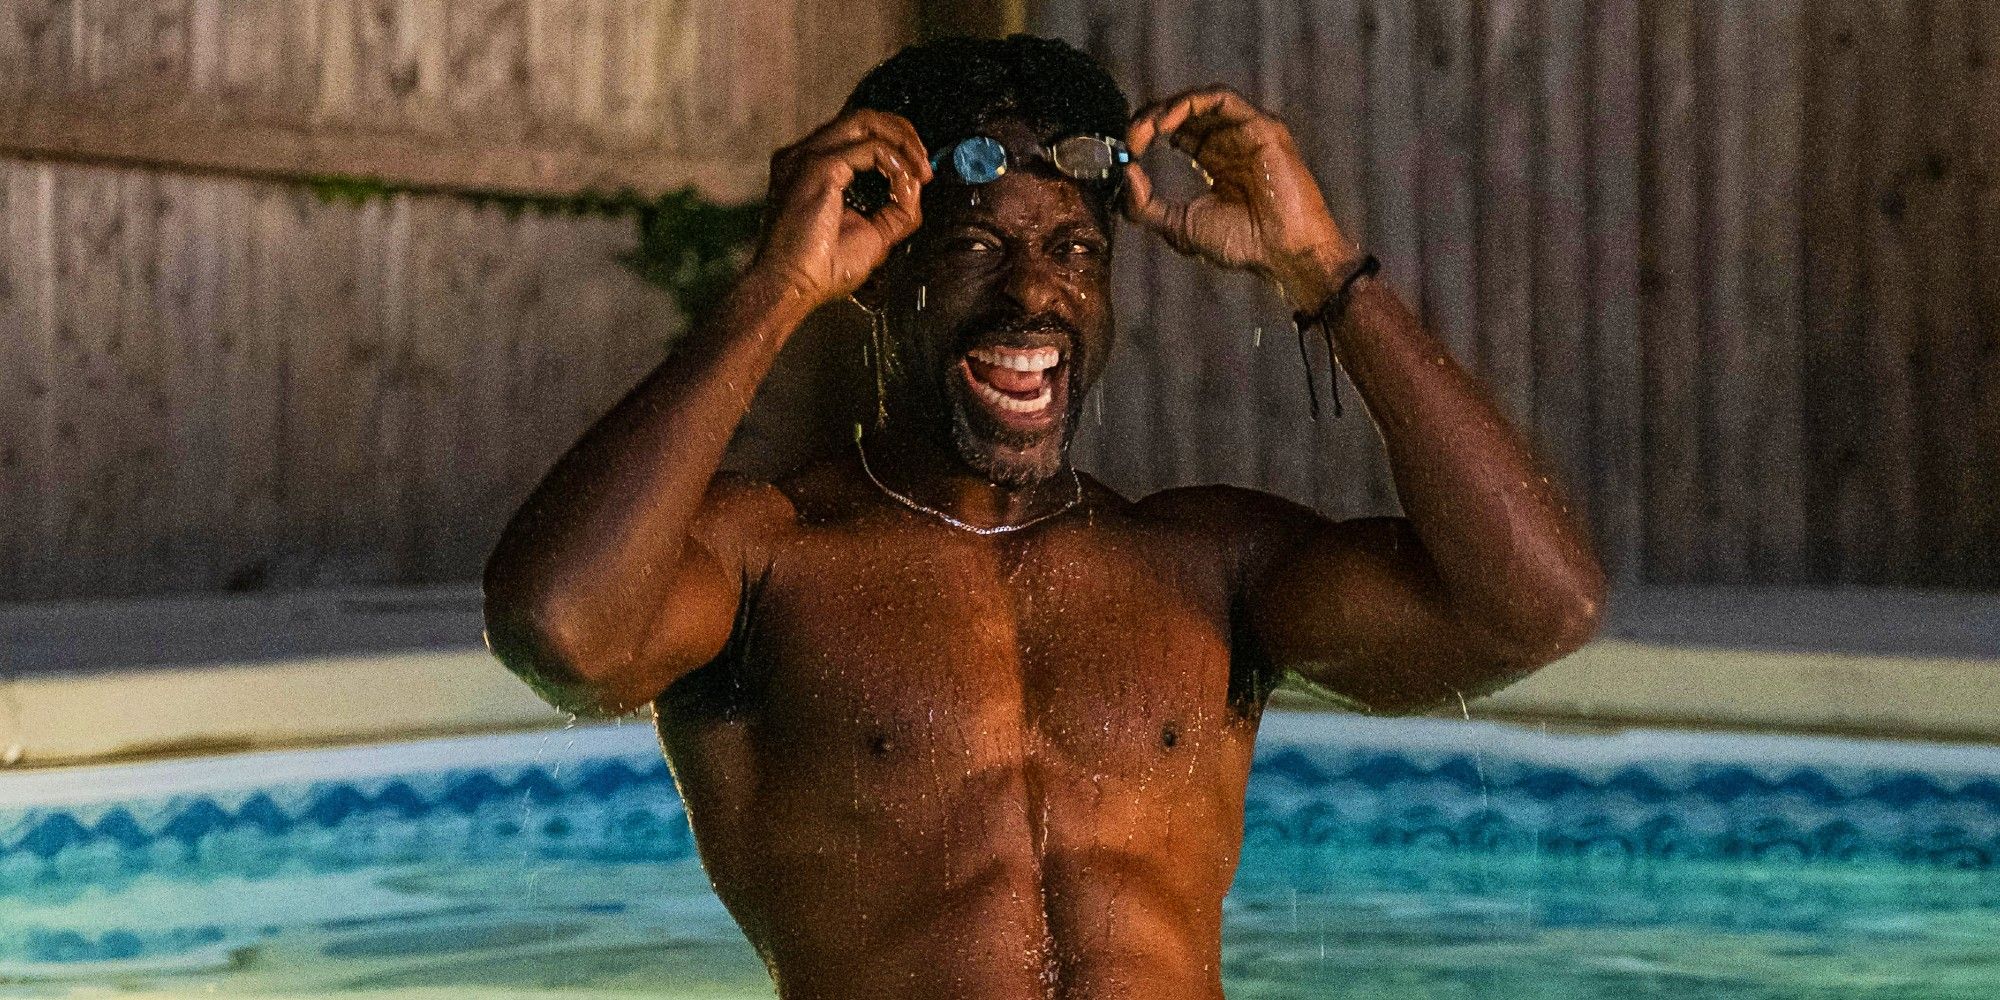 Sterling K Brown in a pool pushing his goggles up on his forehead, looking like he's in the middle of yelling, in American Fiction